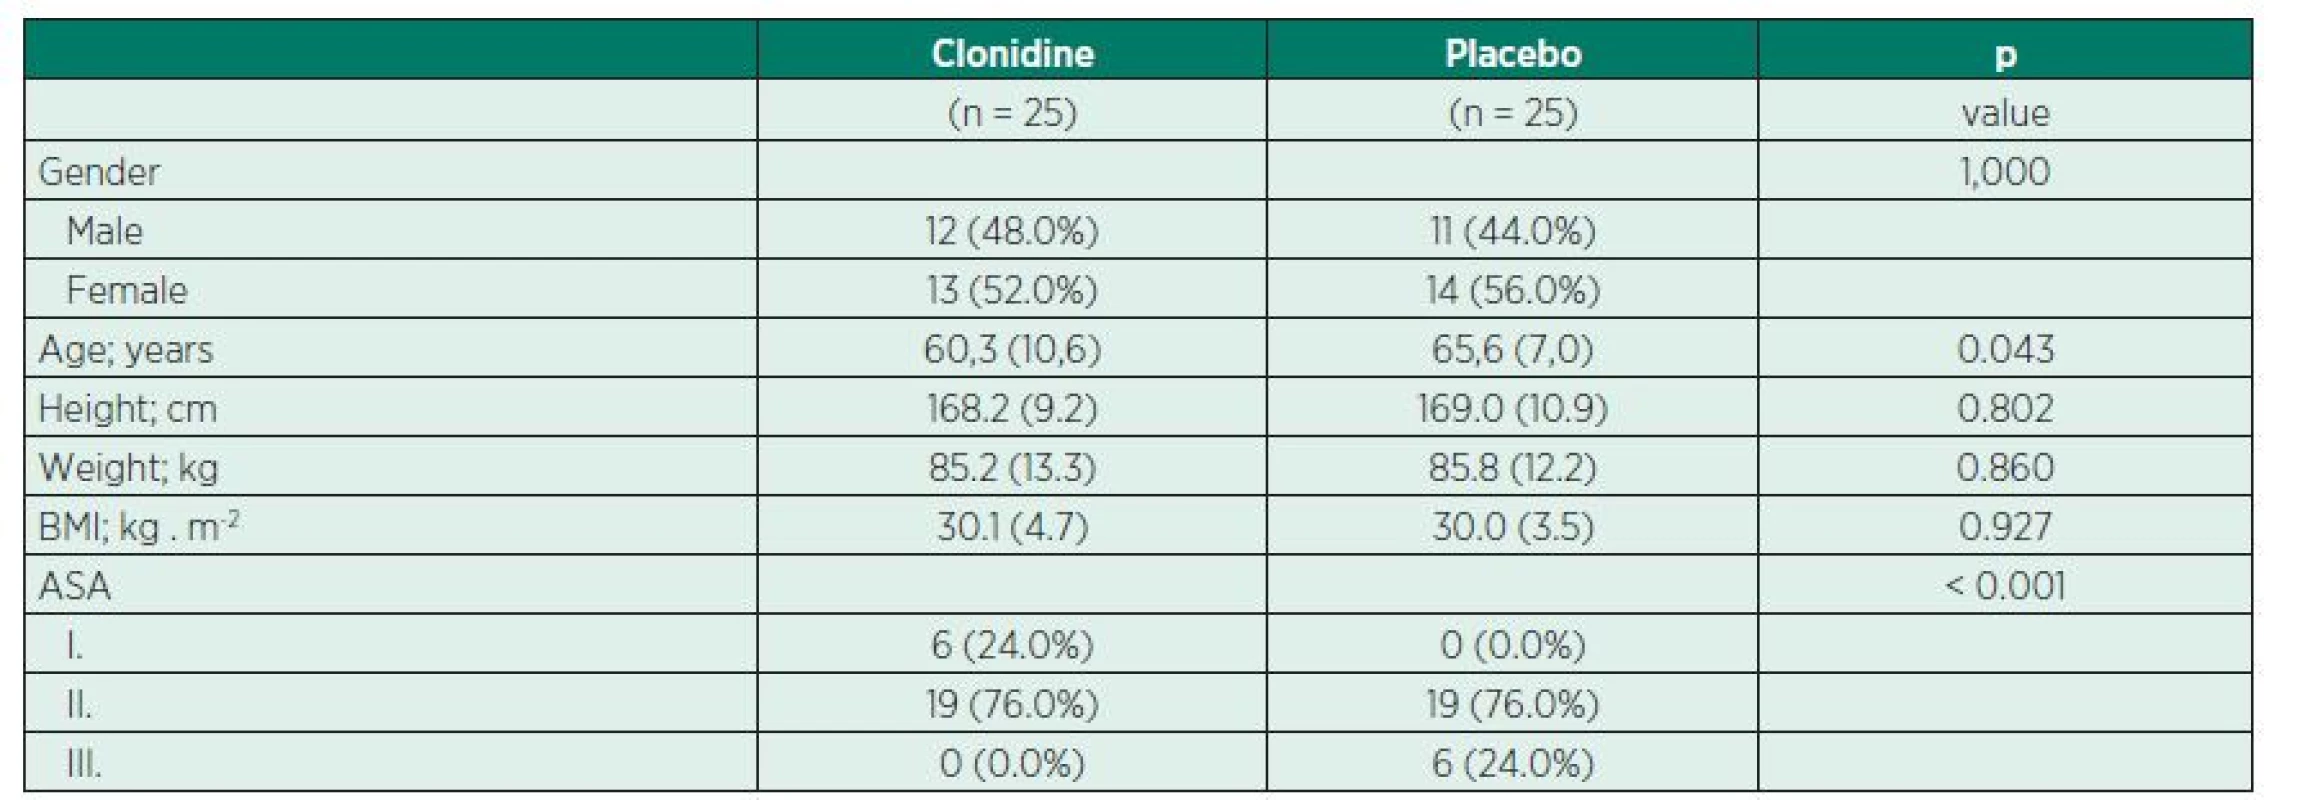 Characteristic of demographic data in clonidine or placebo group in patients undergoing total hip or knee replacement